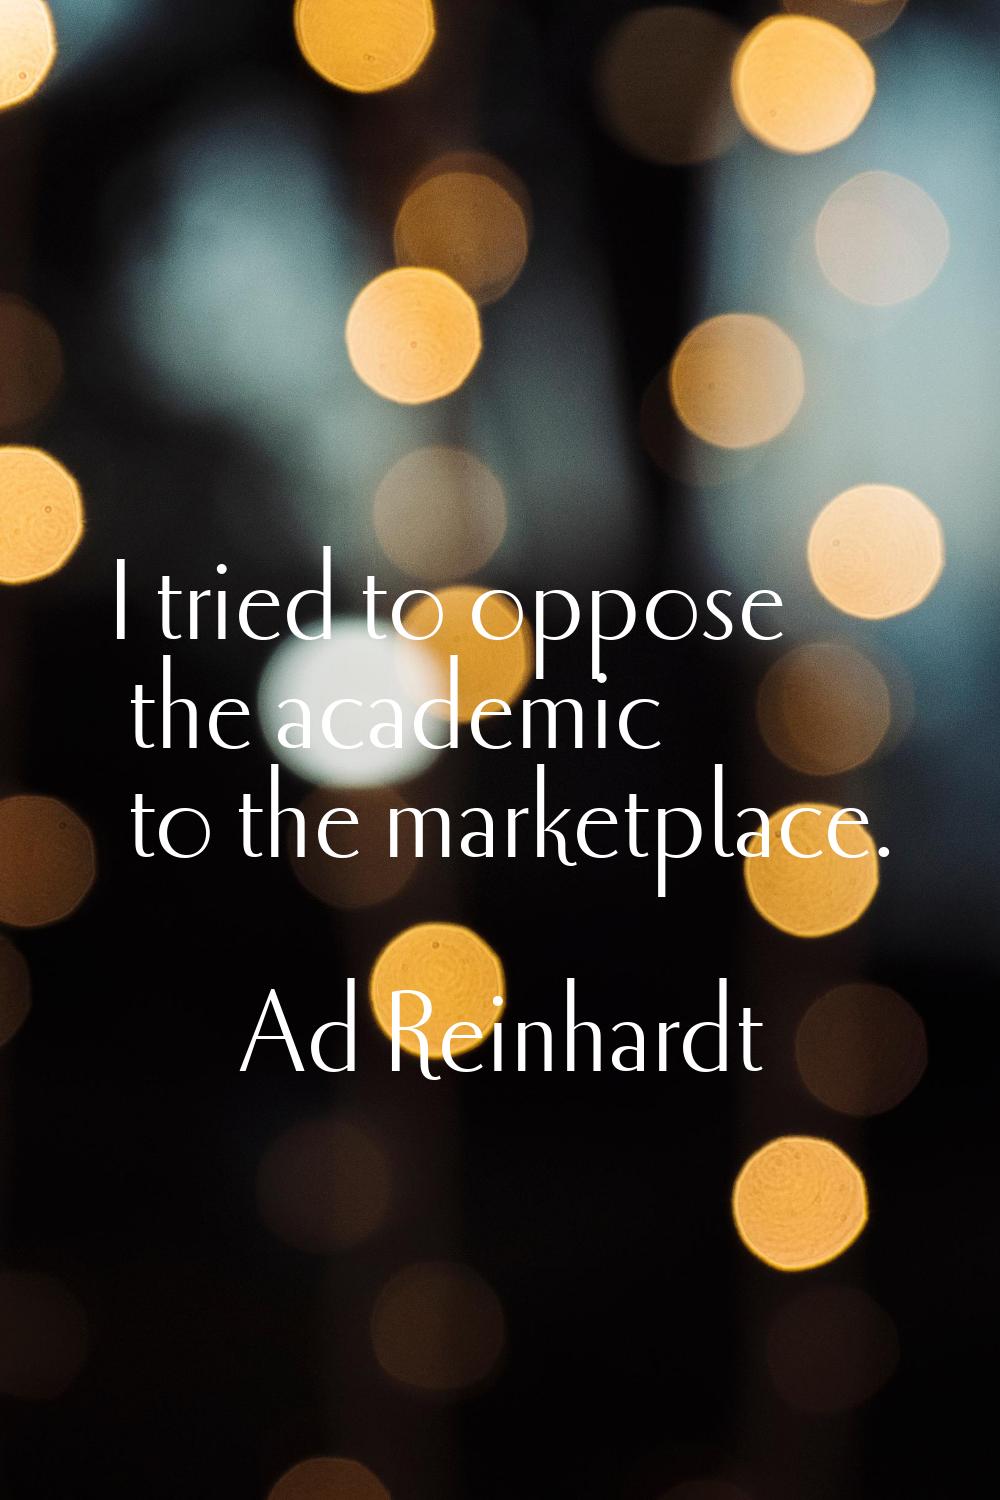 I tried to oppose the academic to the marketplace.